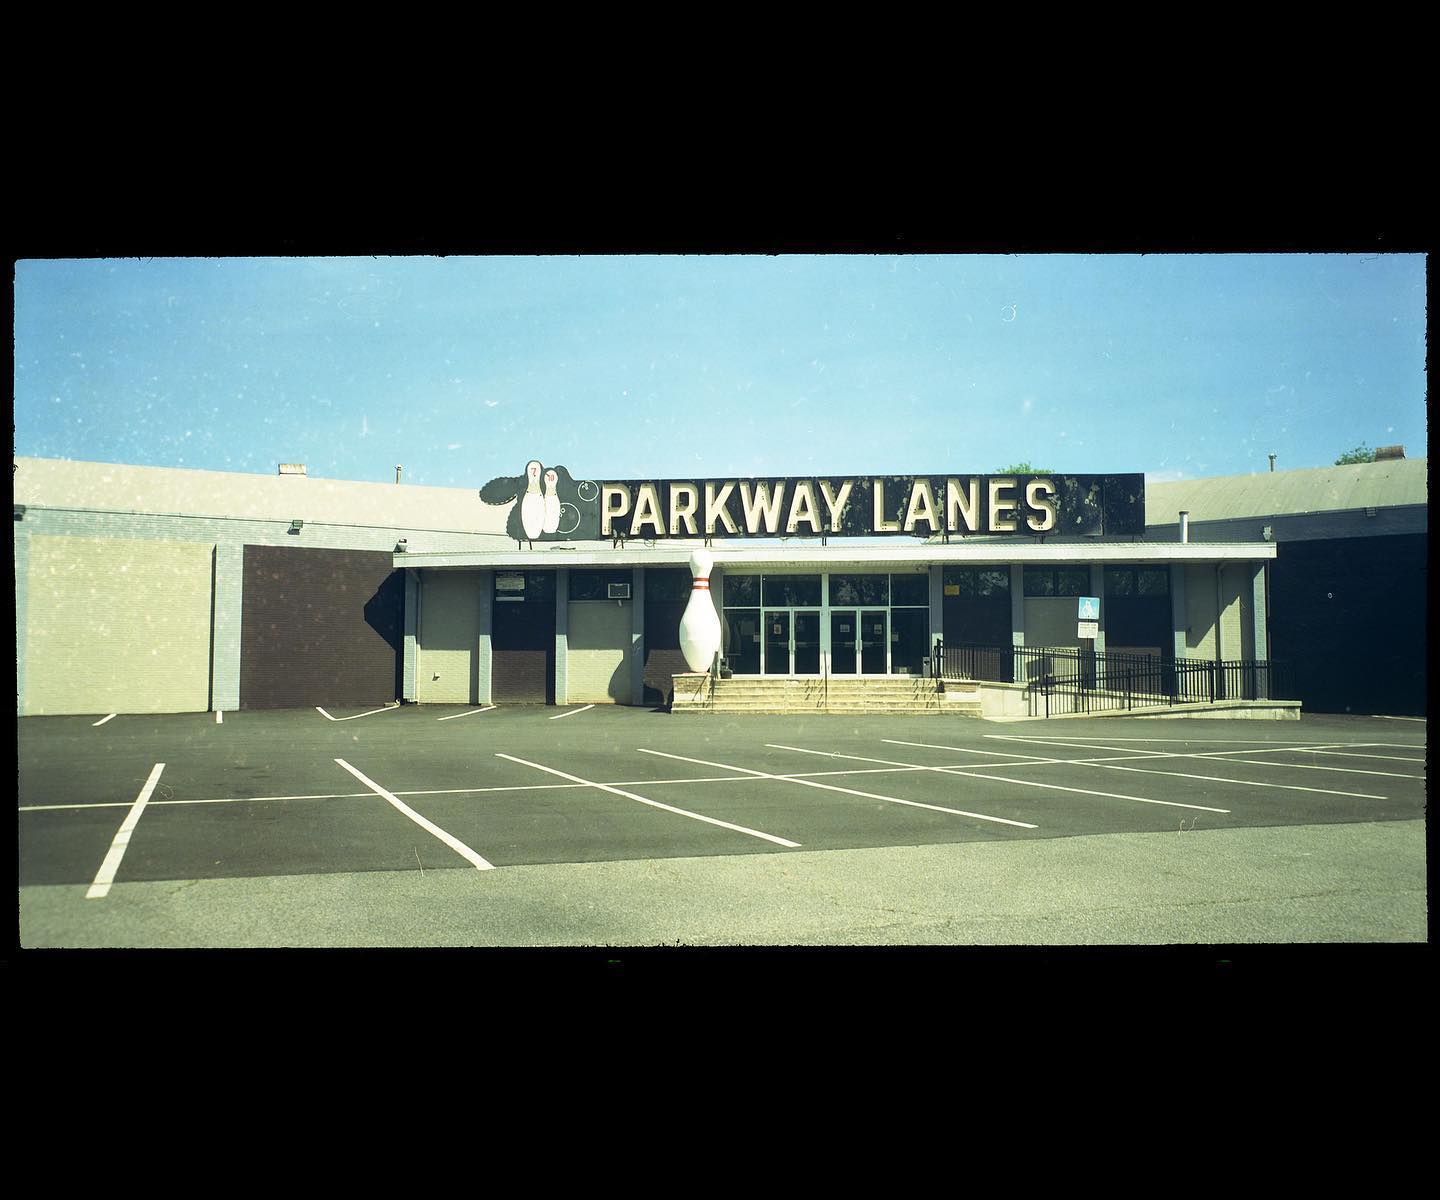 Parkway Lanes

@cinestillfilm 50D, shot on my #kraken612 3D-printed camera, designed by @frozenphotoncameraco , and developed in ECN-2, its original intended developer, that I bought from @conspiracy.of.cartographers . Pretty happy with how this roll turned out. #film #filmphotography #filmphotographypodcast #shootfilmstaybroke